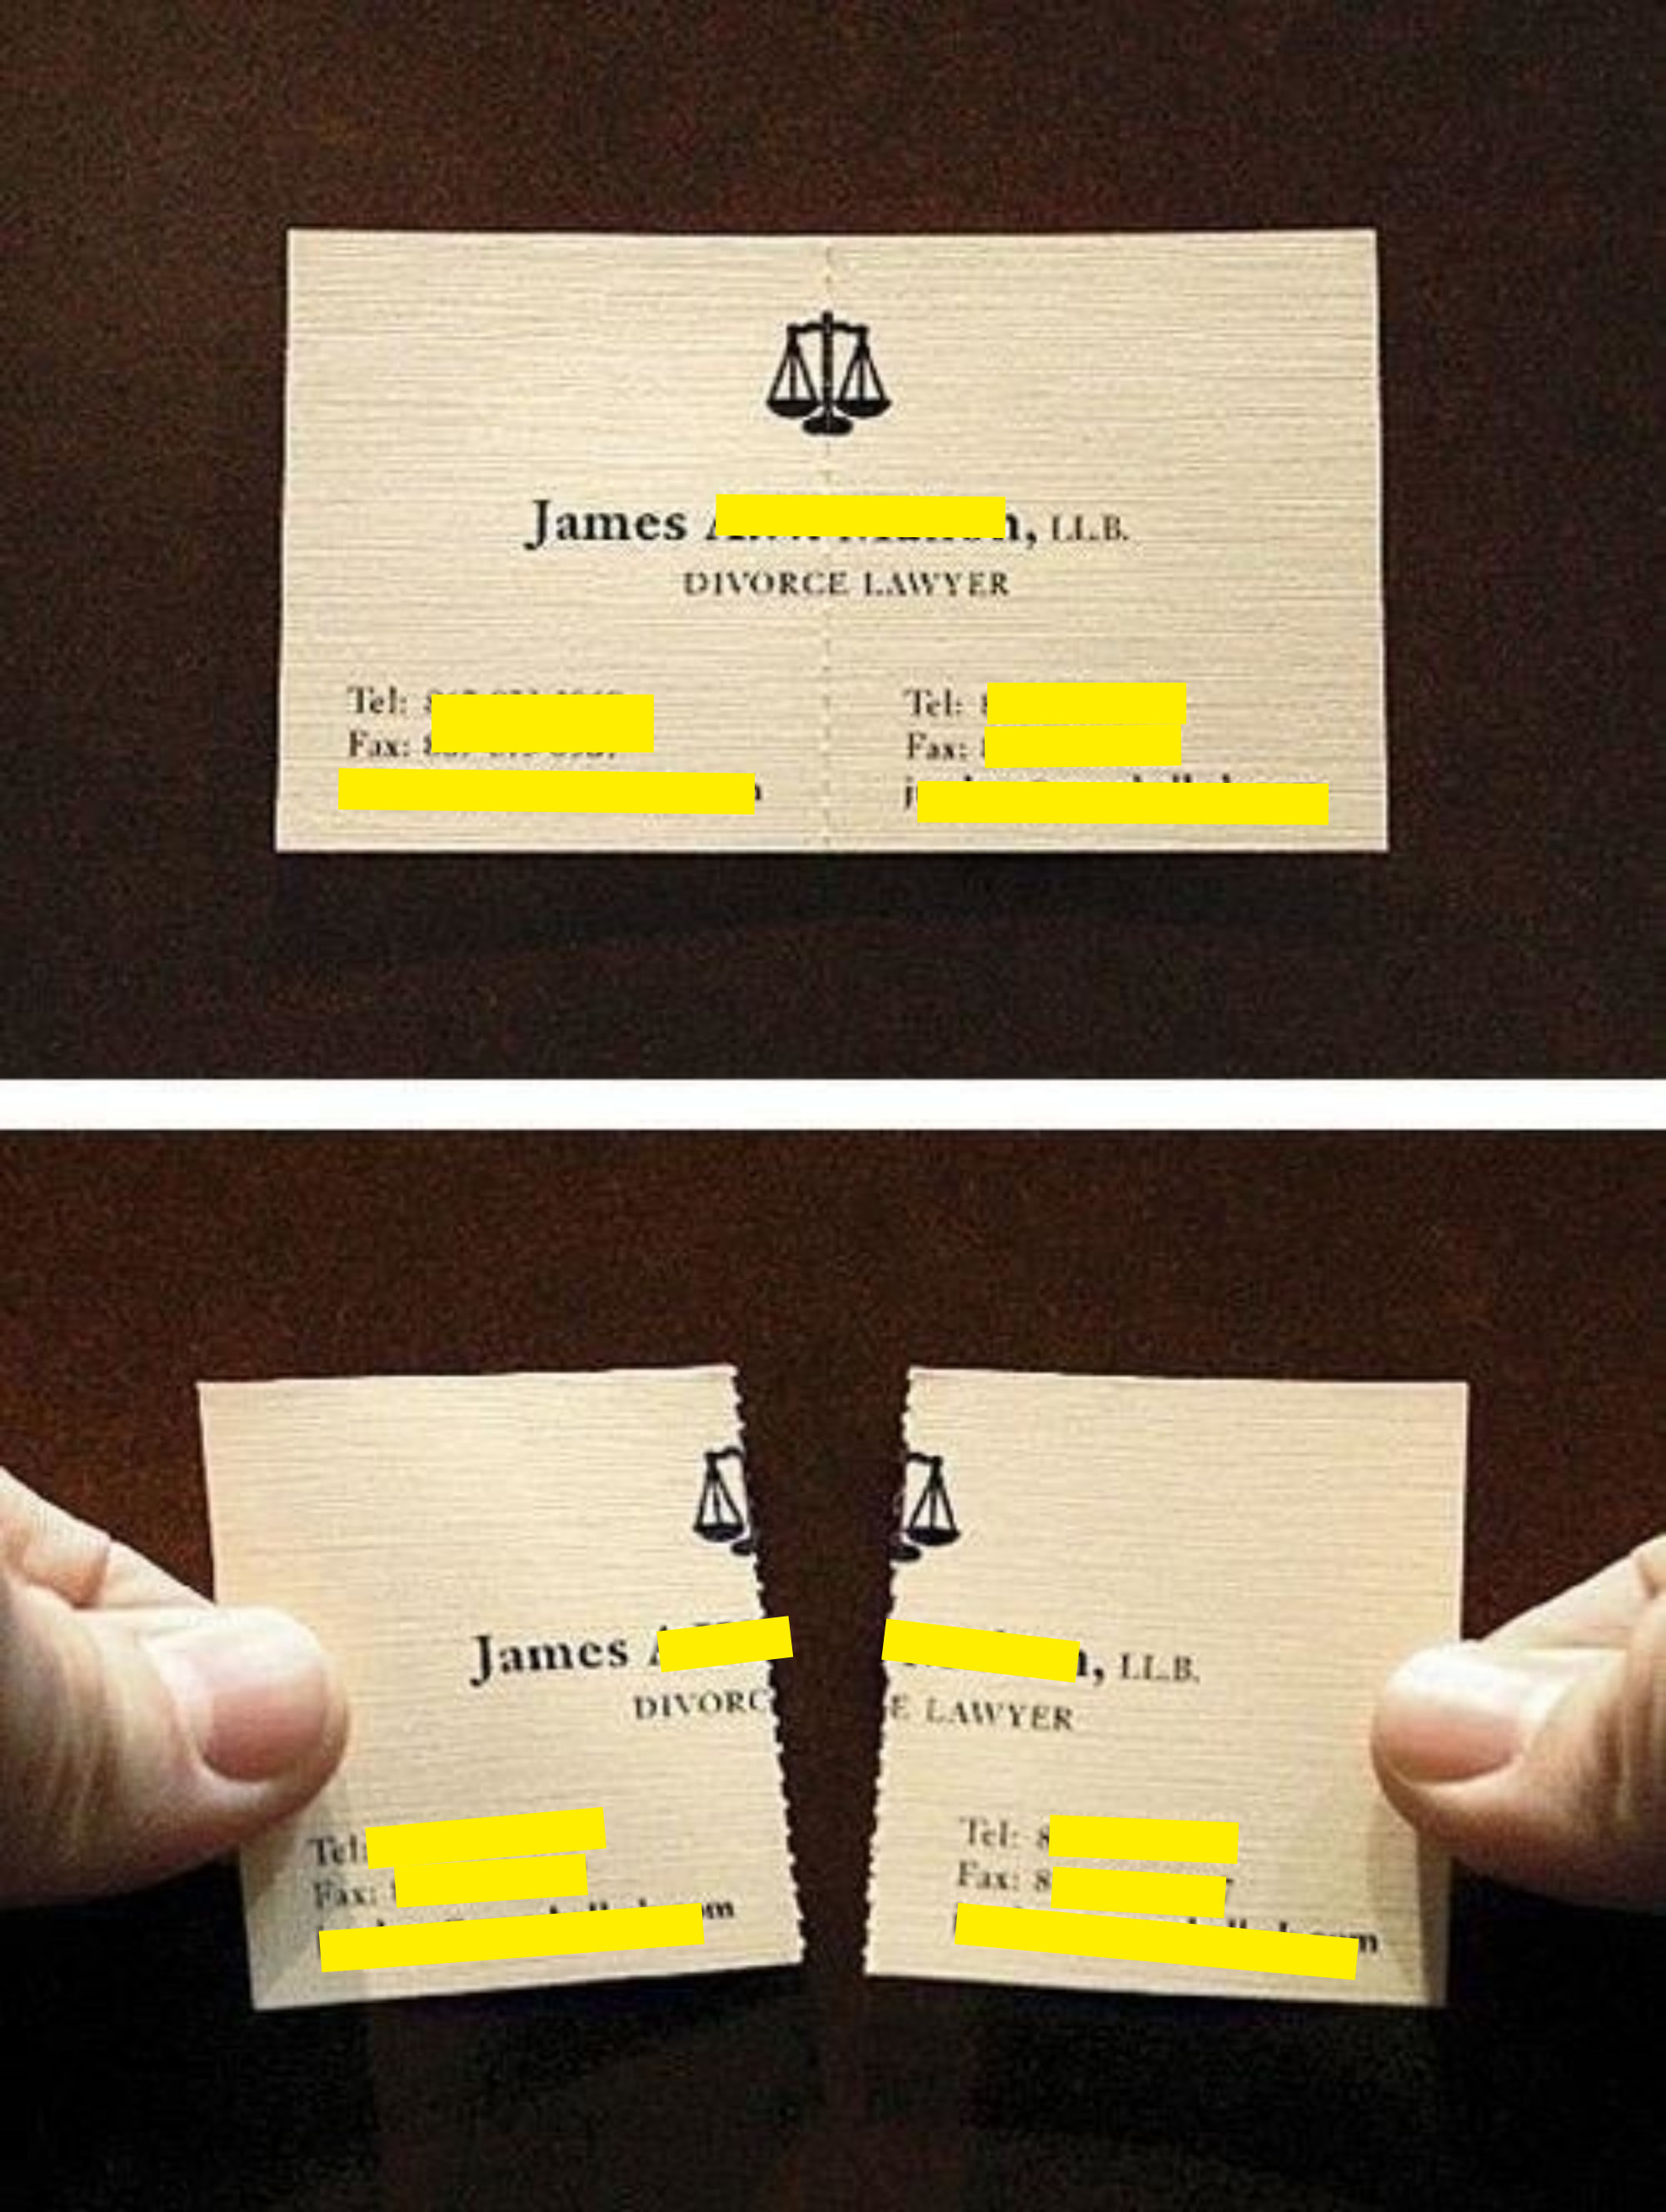 A divorce lawyer business card that tears into two parts